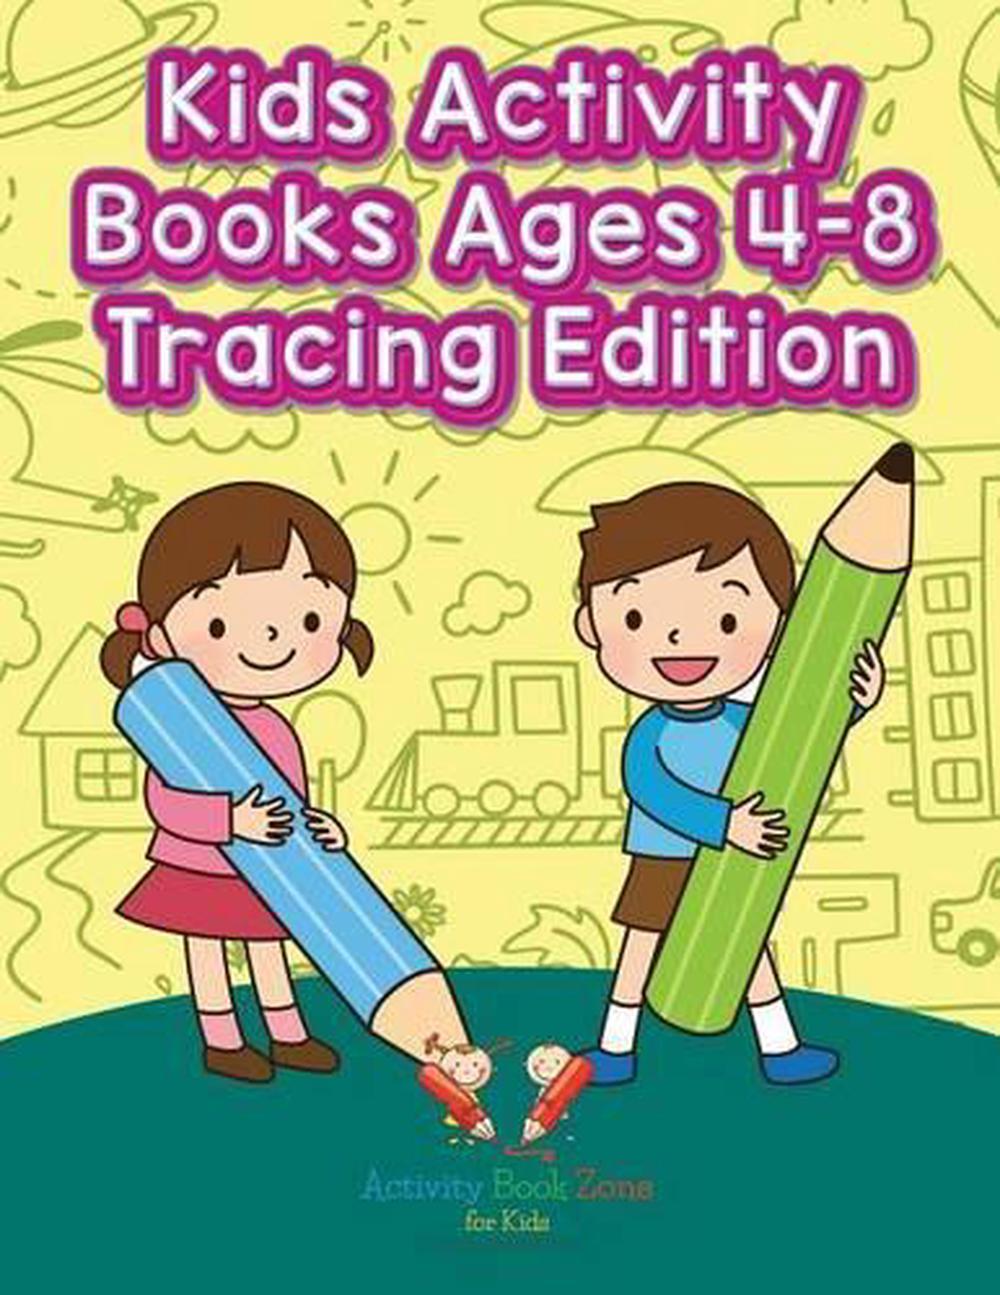 kids-activity-books-ages-4-8-tracing-edition-by-activity-book-zone-for